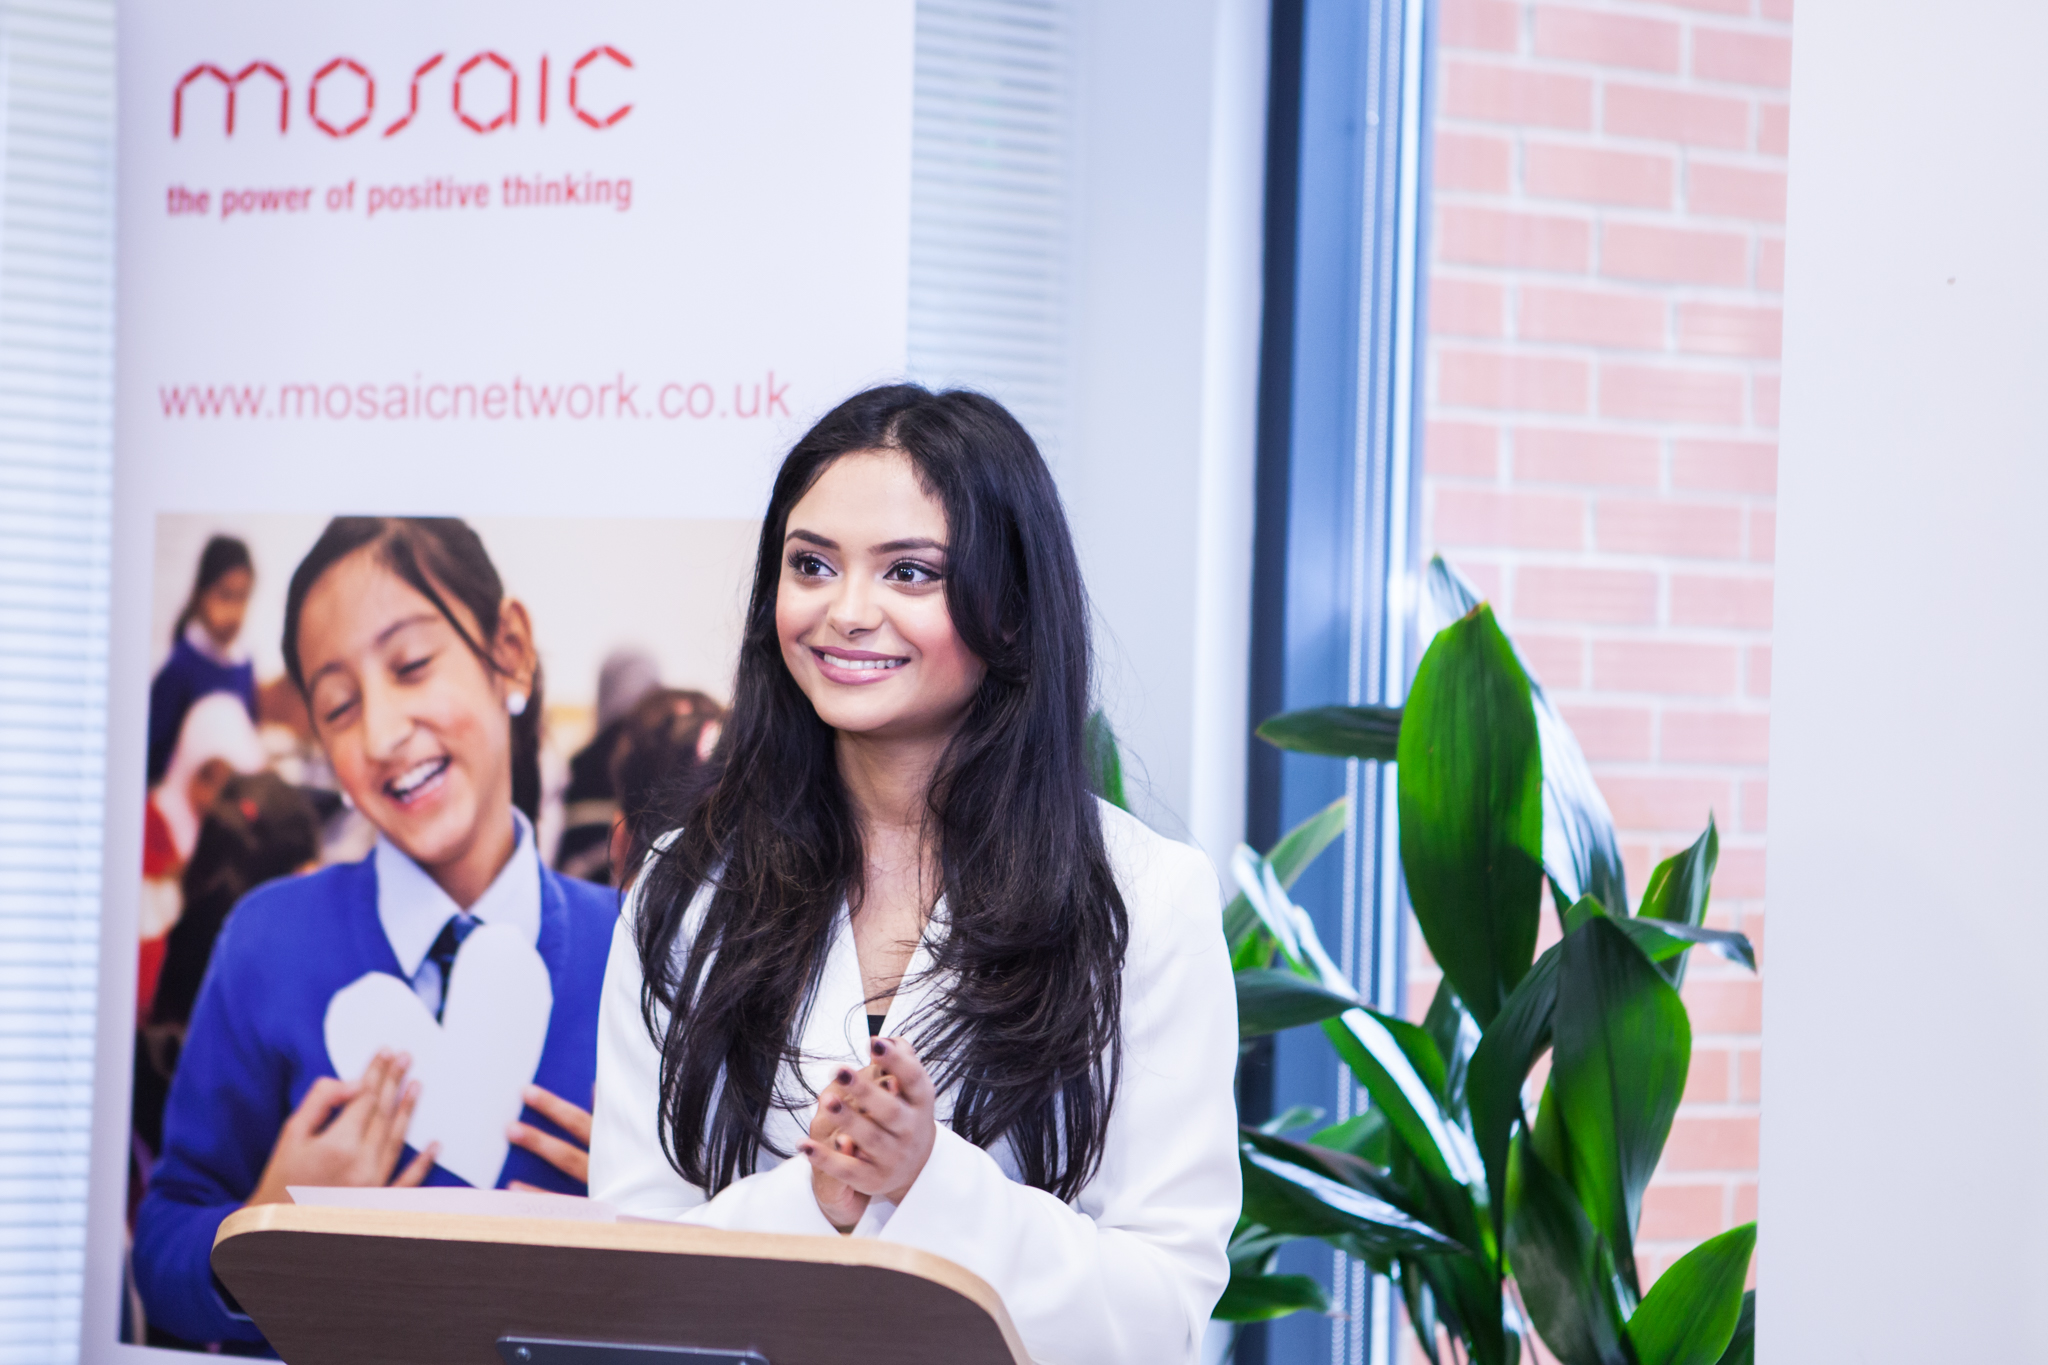 Afshan Azad the event host